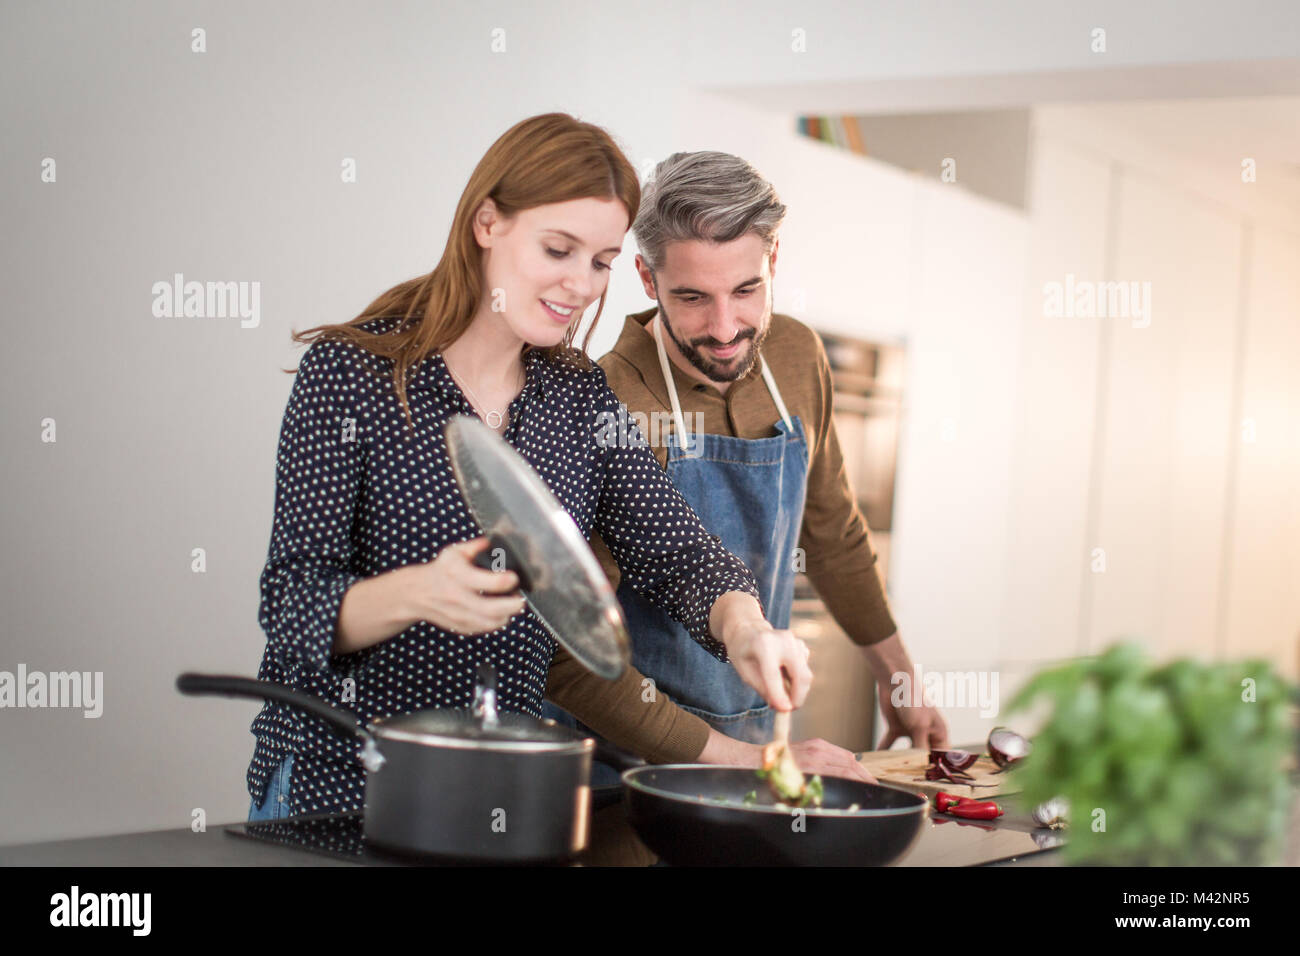 Couple preparing an evening meal together Stock Photo